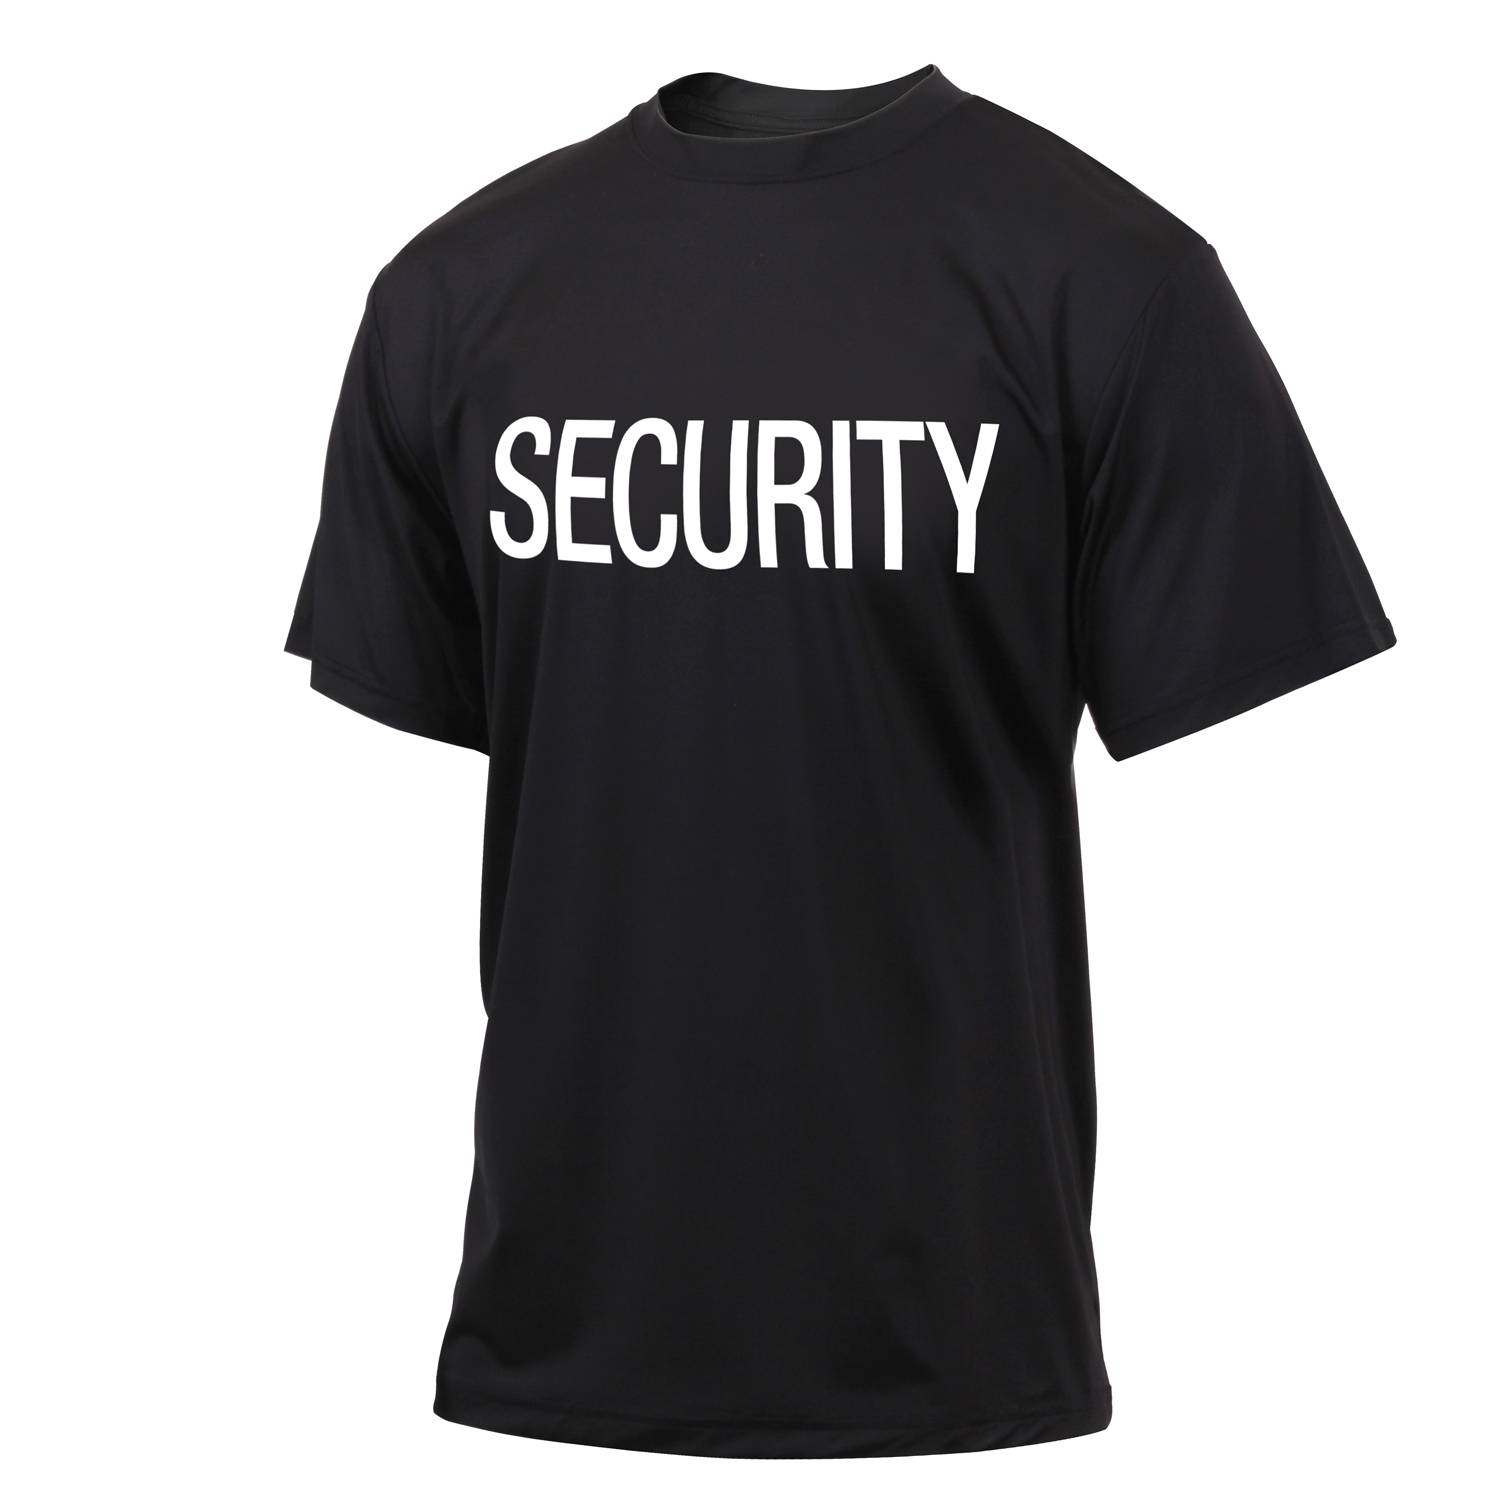 Rothco Quick Dry Performance Security Tee Shirt